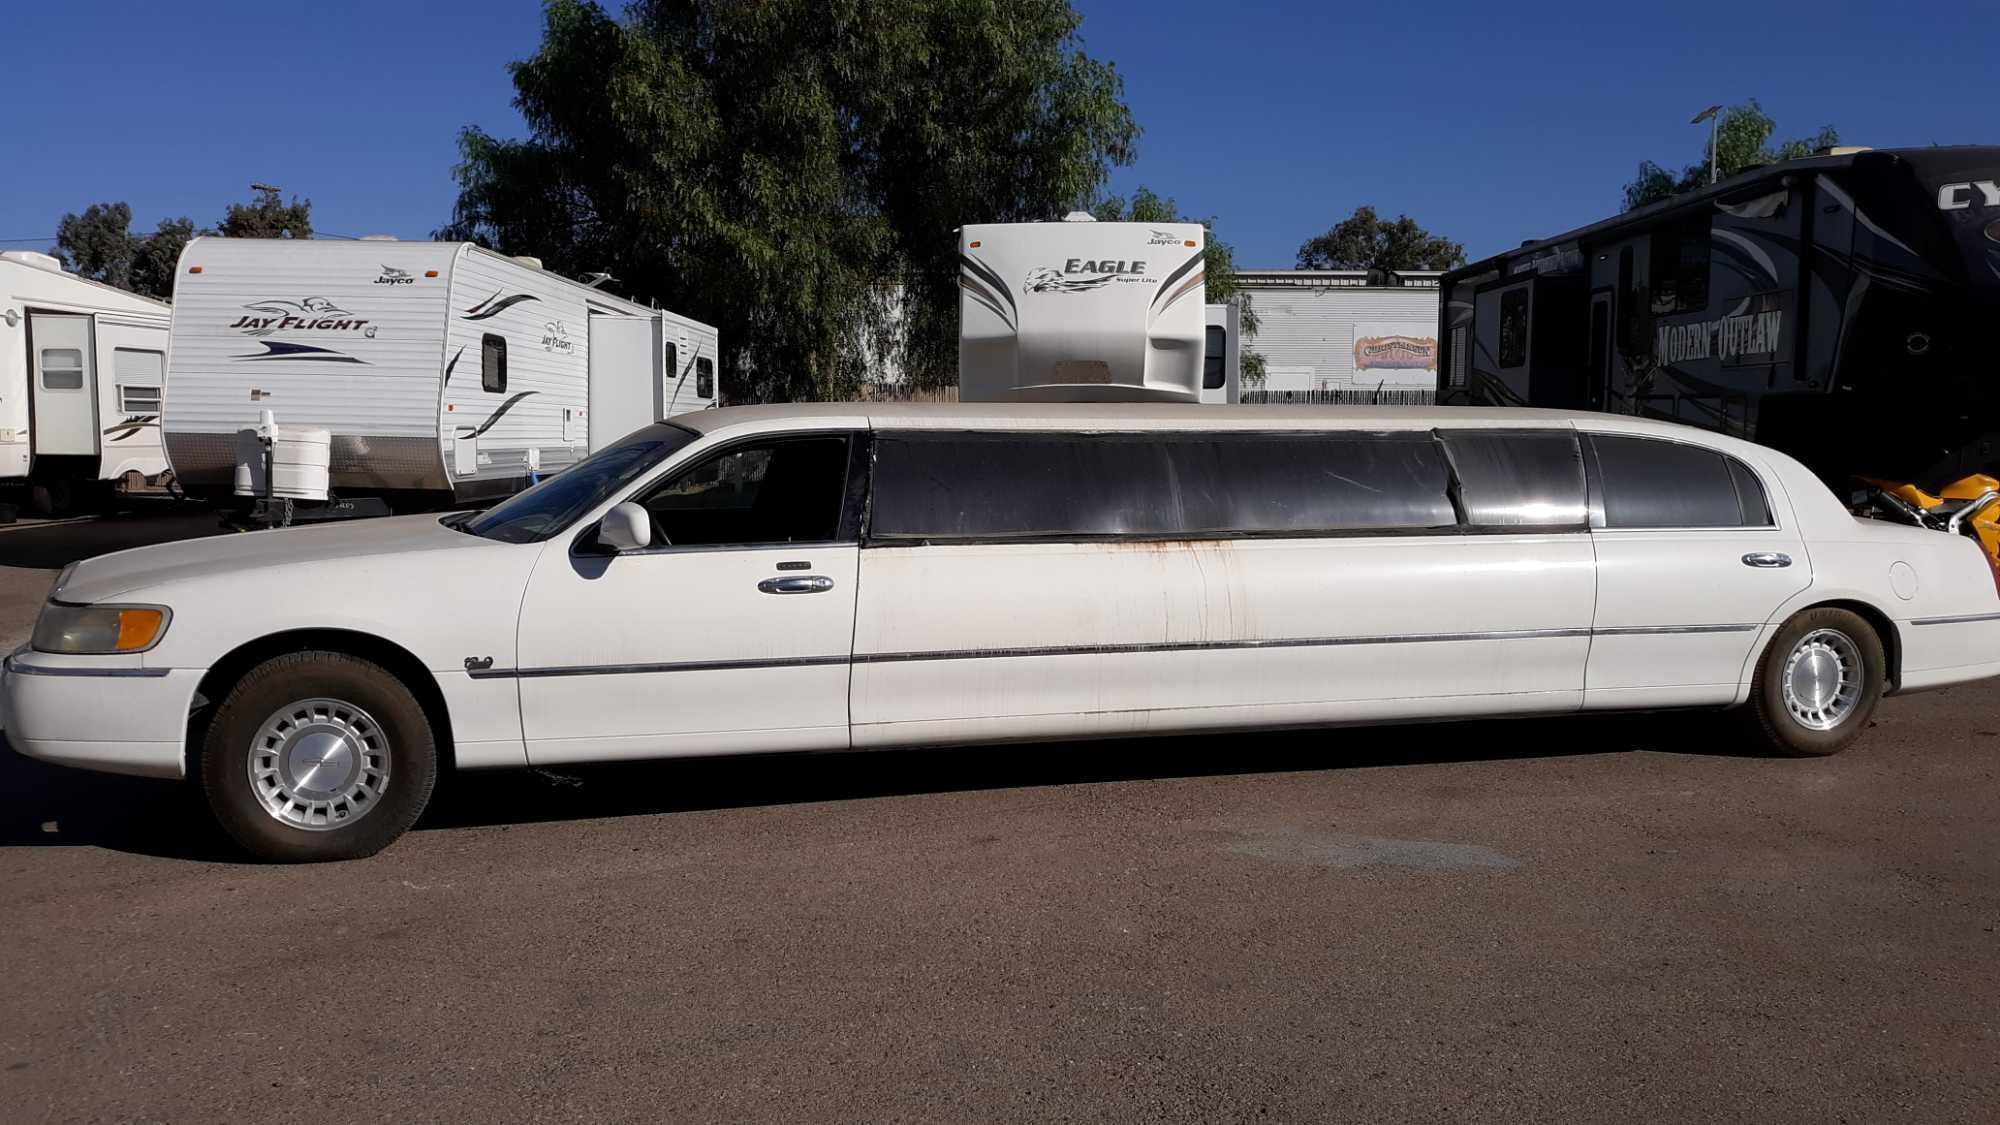 2001 Lincoln Town Car 10 Passenger Limousine*TITLE STATES PRIOR TAXI USE*FOR DEALER/DISMANTLER OR